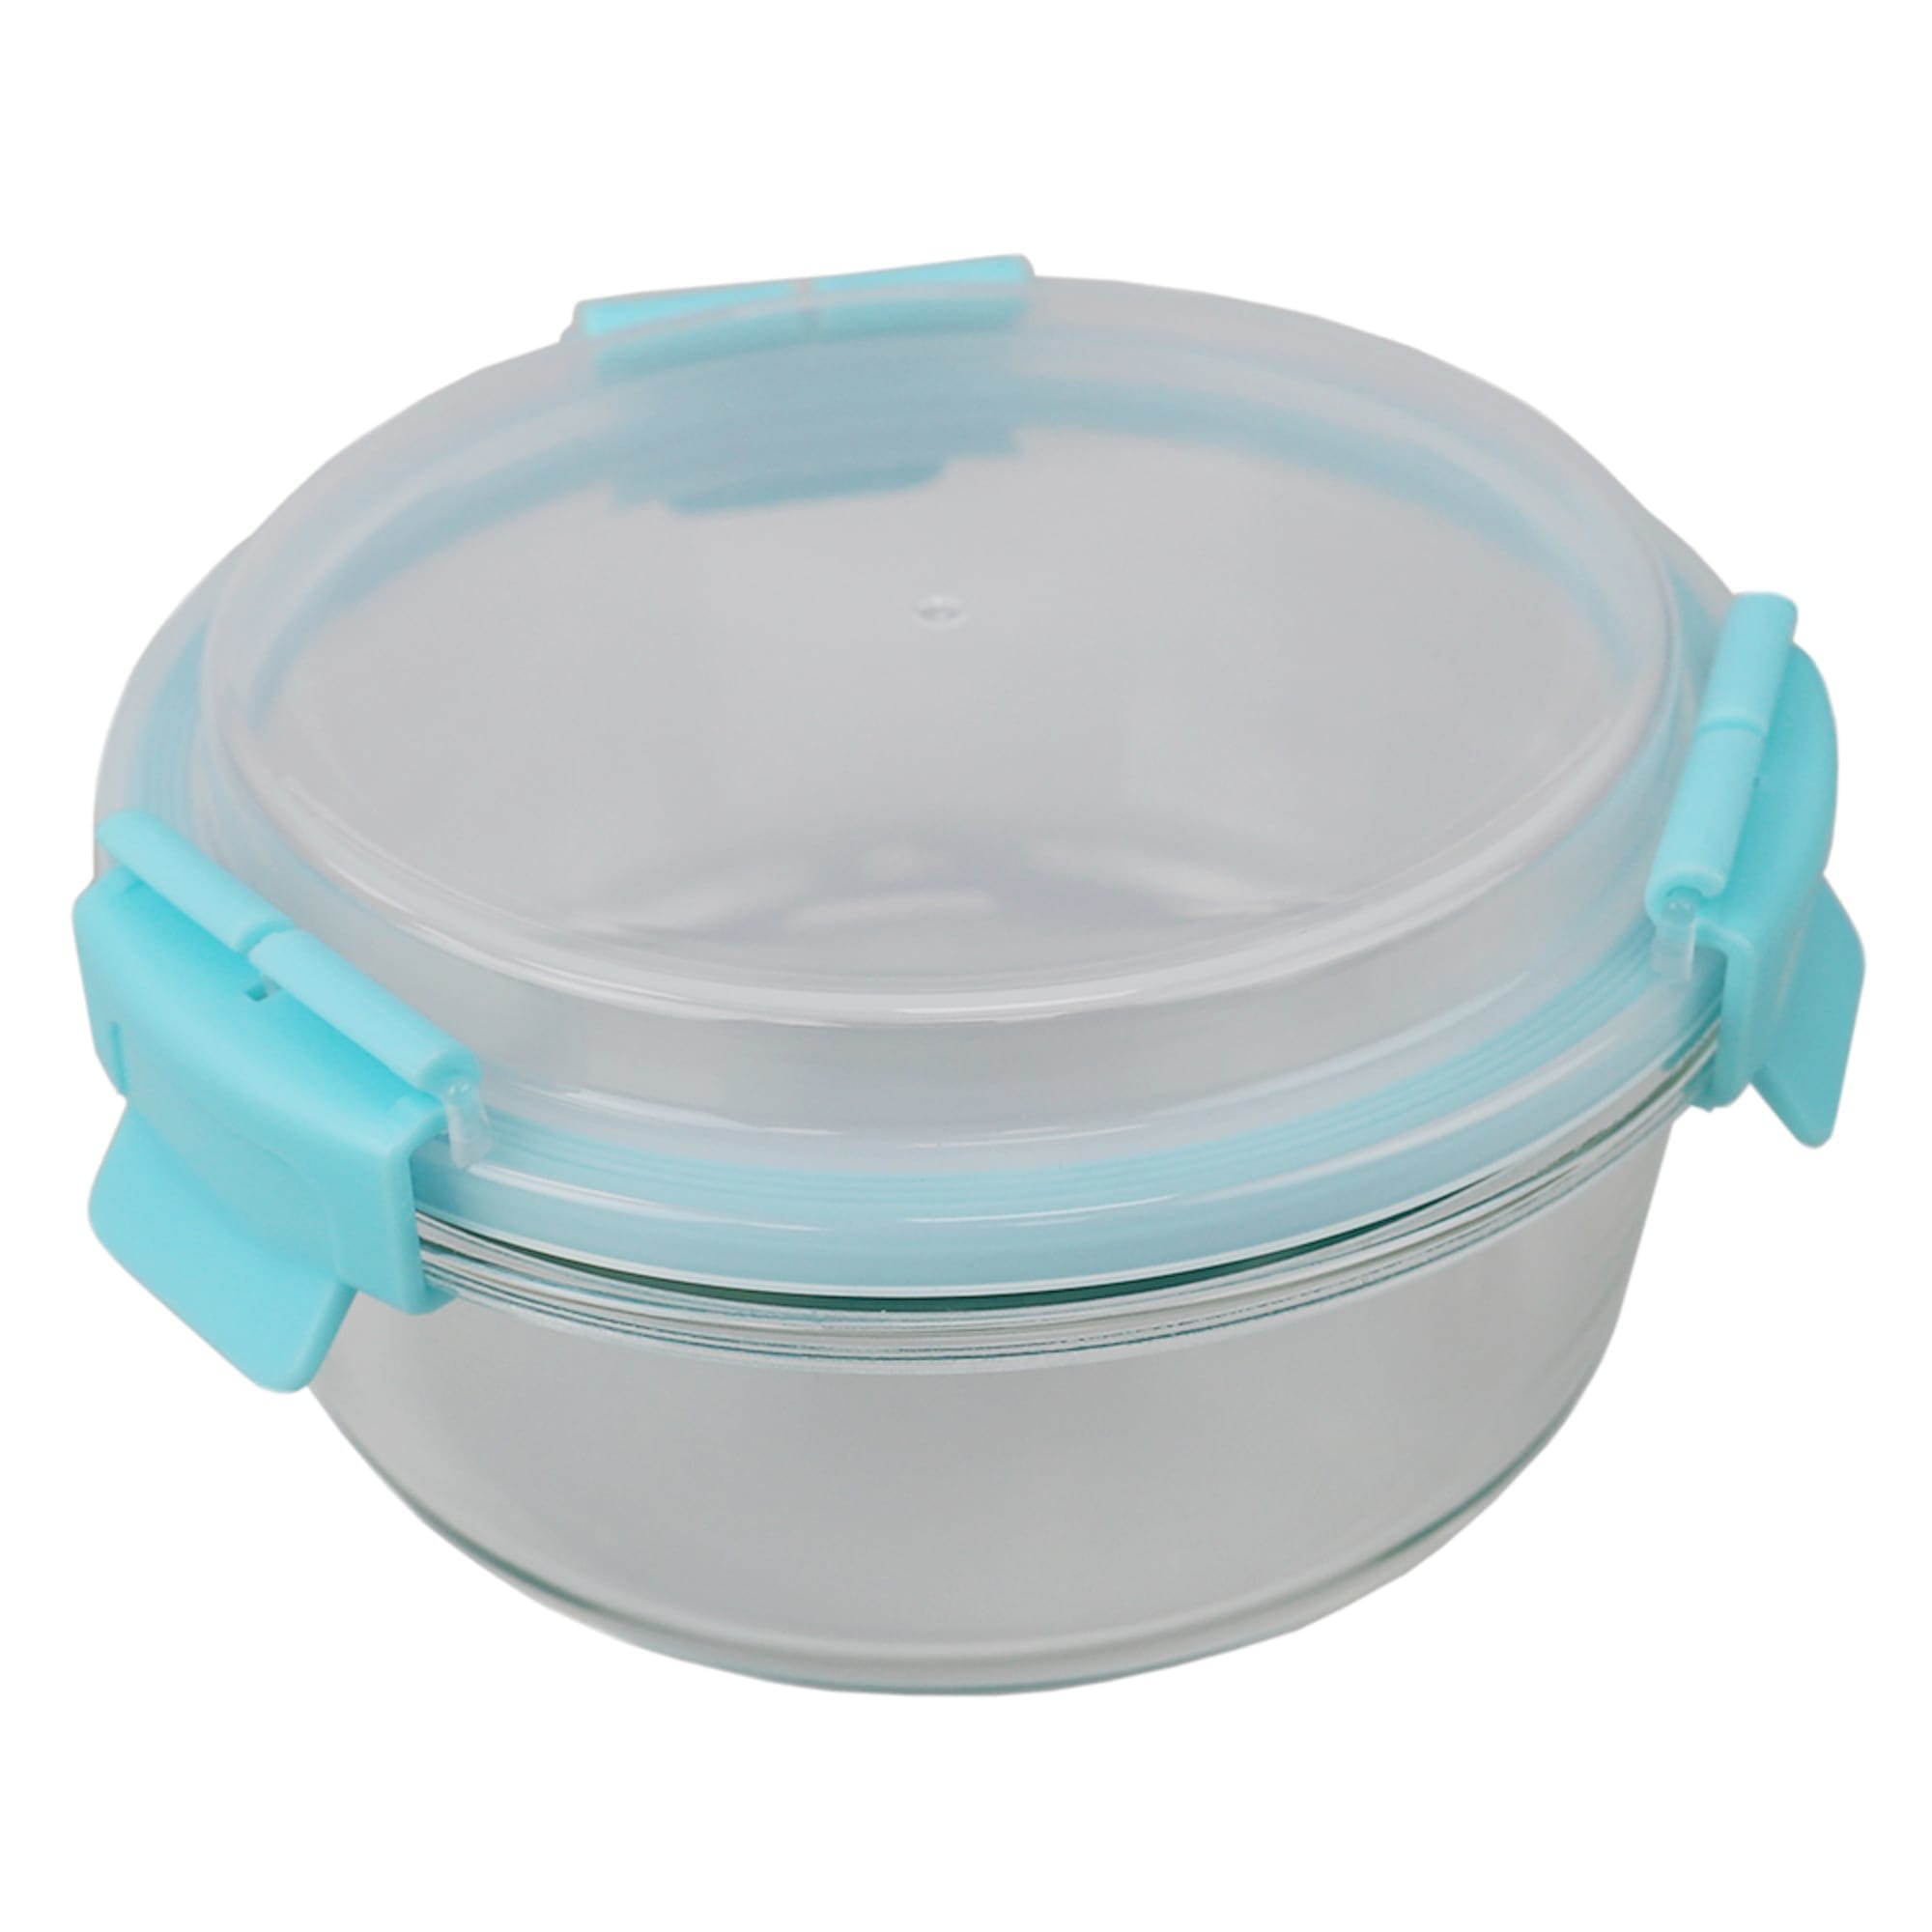 Home Basics  Leak Proof 32 oz. Round Borosilicate Glass Food Storage Container with Air-tight Plastic Lid, Turquoise $5.00 EACH, CASE PACK OF 12